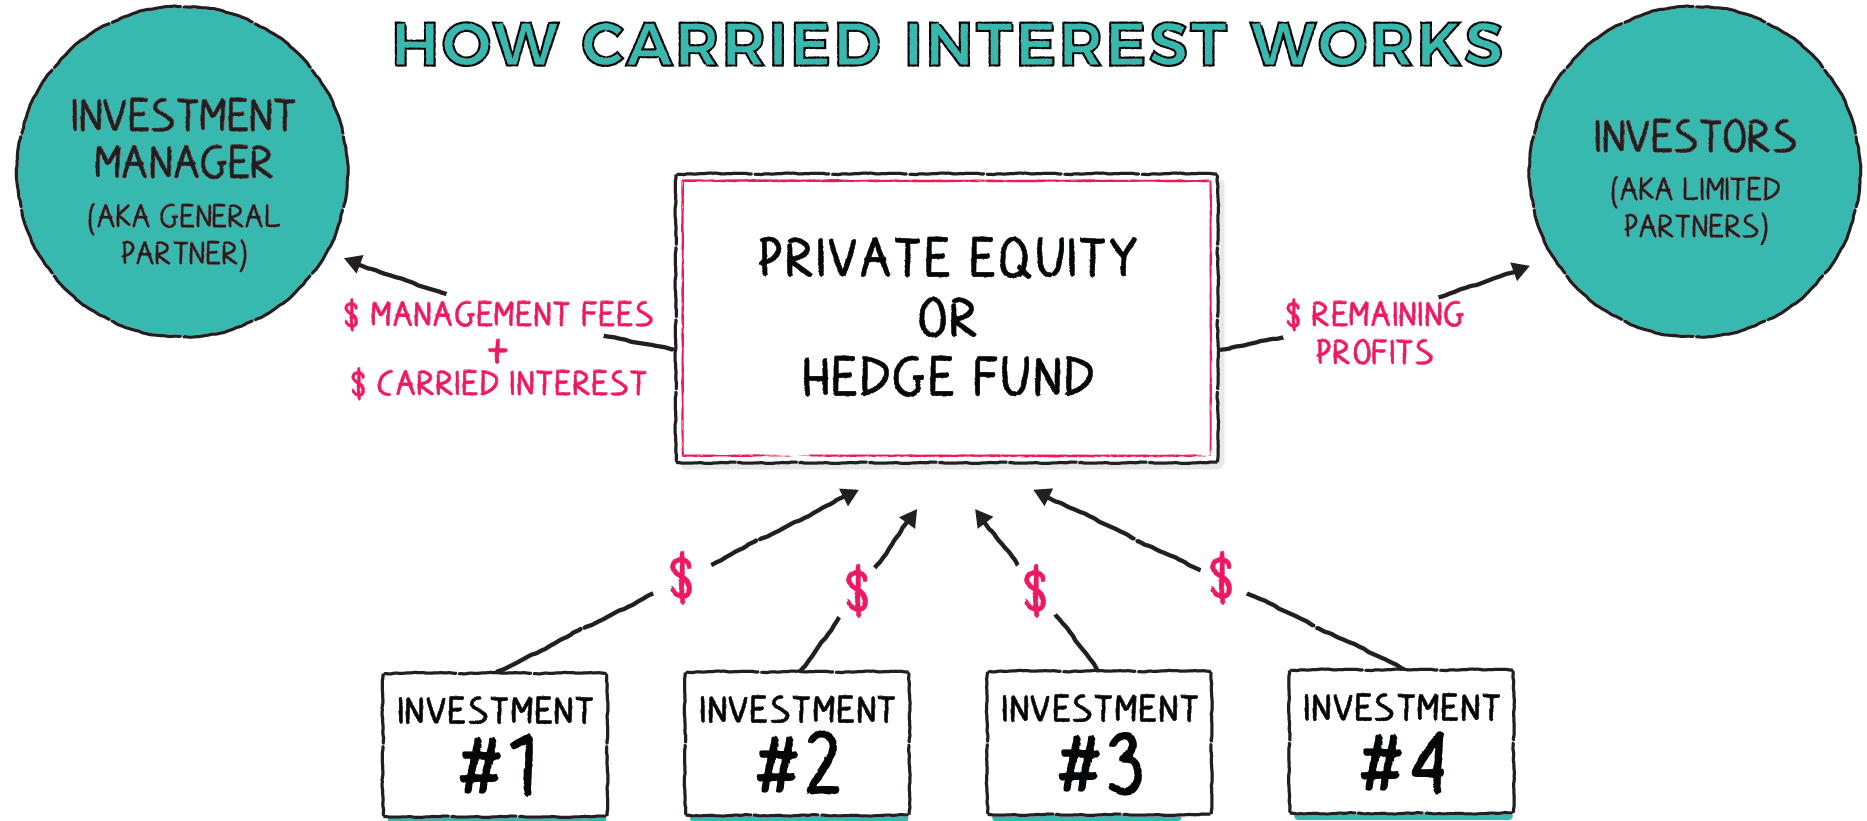 Private Equity Explained in Detail!